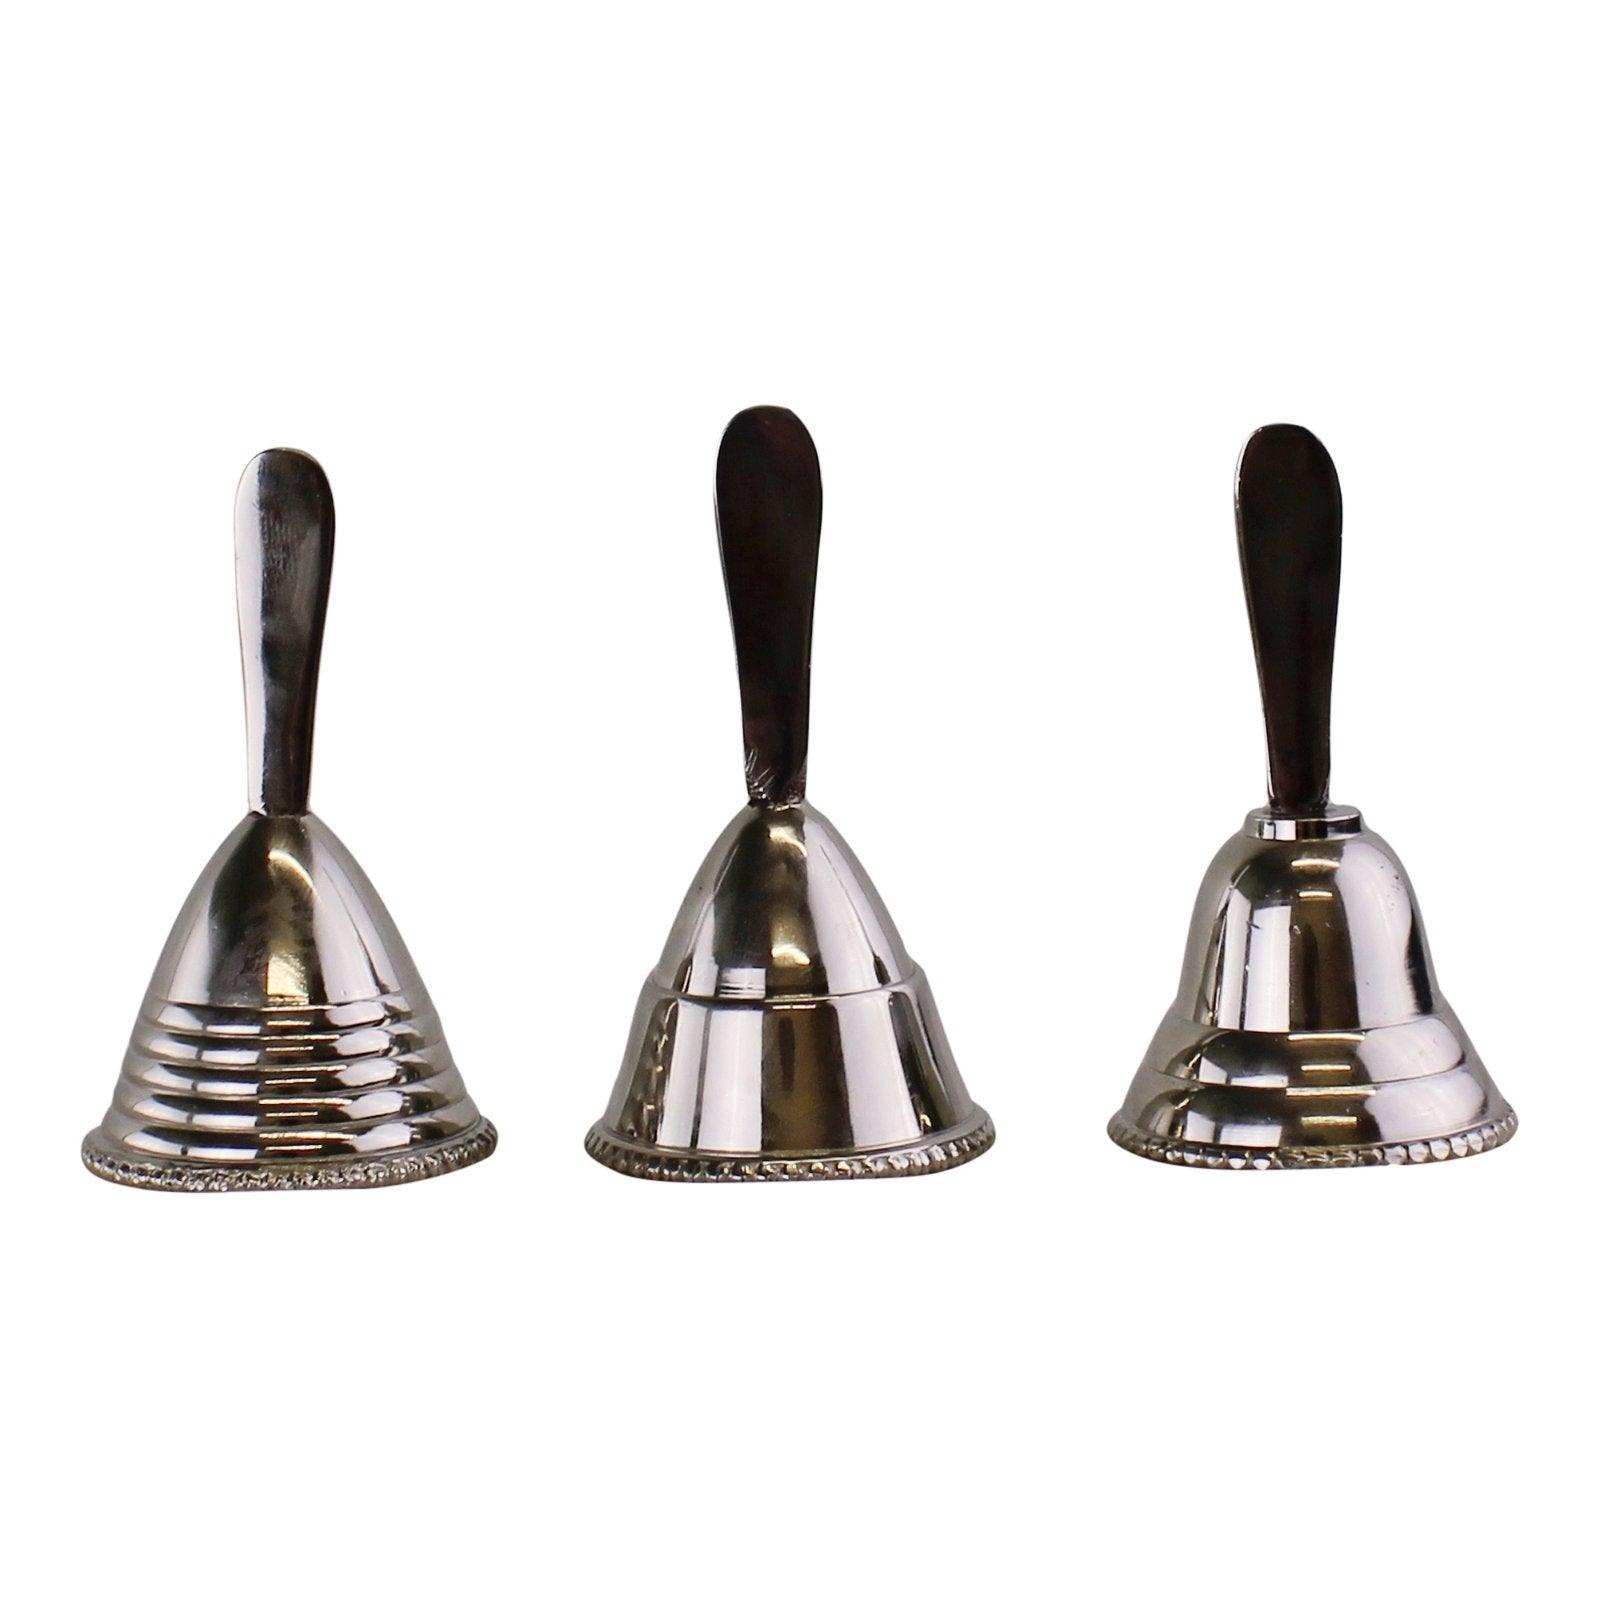 View Case of 12 Silver Metal Hand Bells information